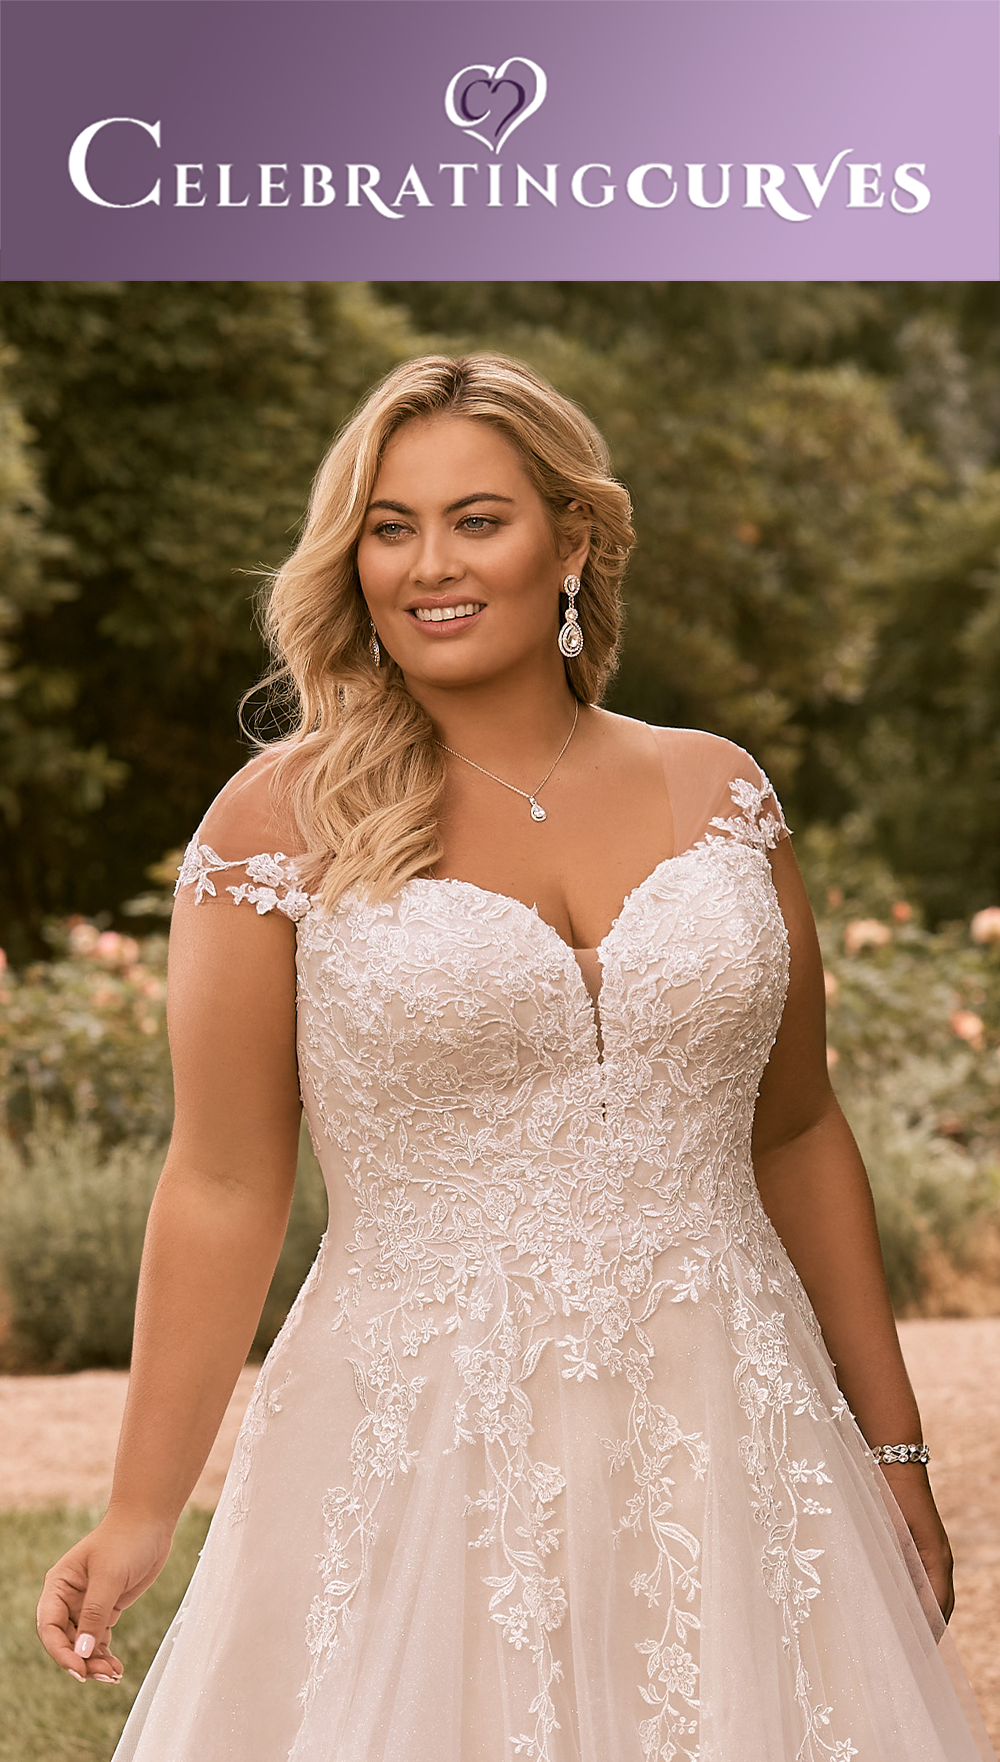 Celebrating Curves - the bridal studio devoted to fuller figure brides in sizes 16 to 30 plus - The Bride - Celebrating Curves - the bridal studio devoted to curvaceous fuller